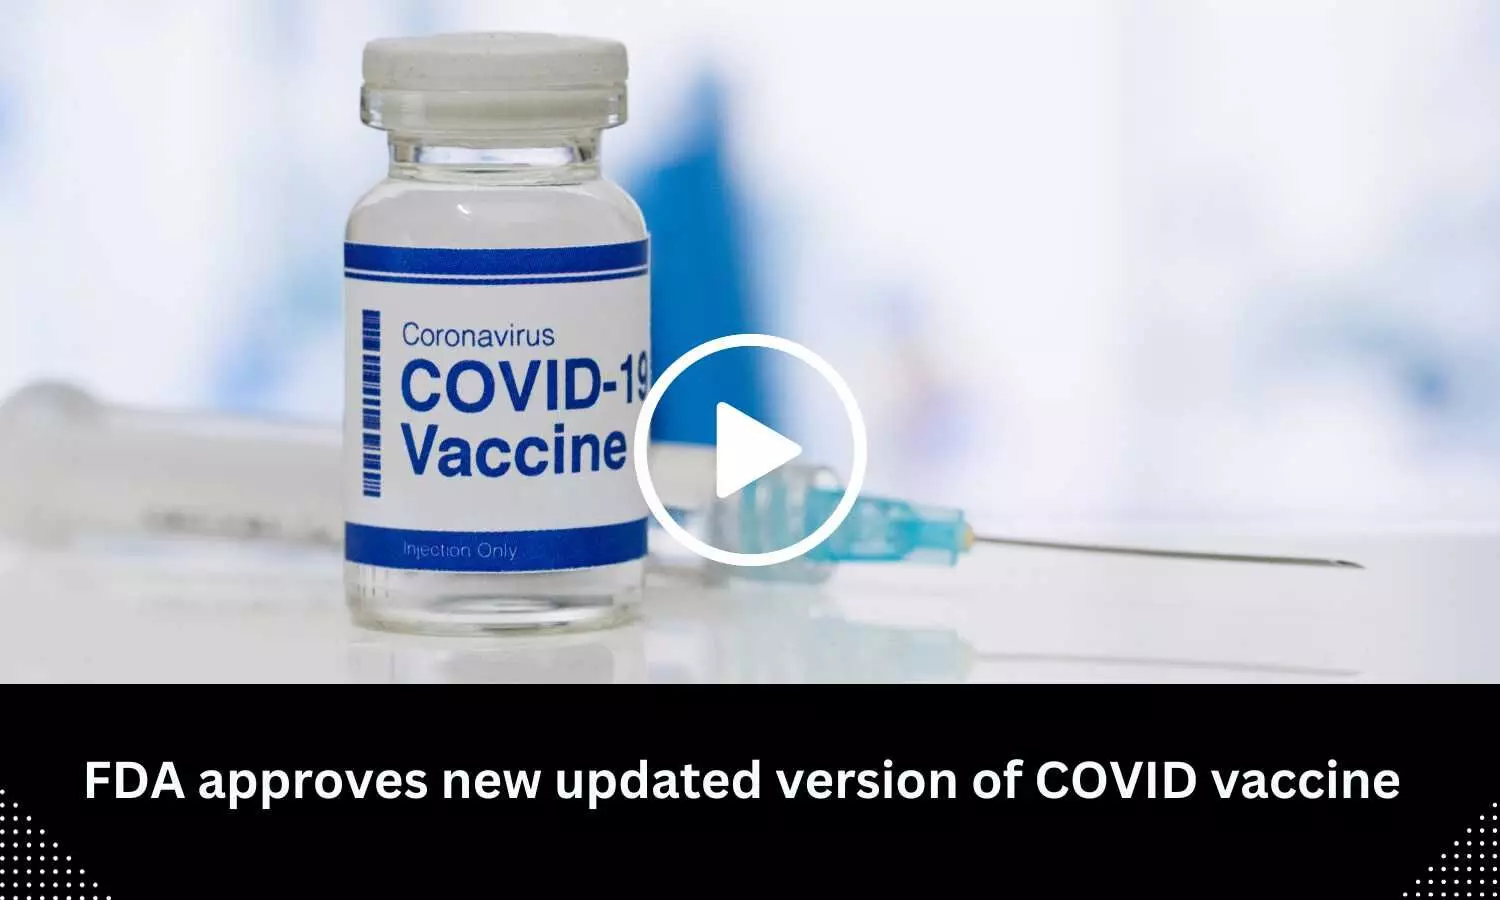 FDA approves new updated version of COVID vaccine